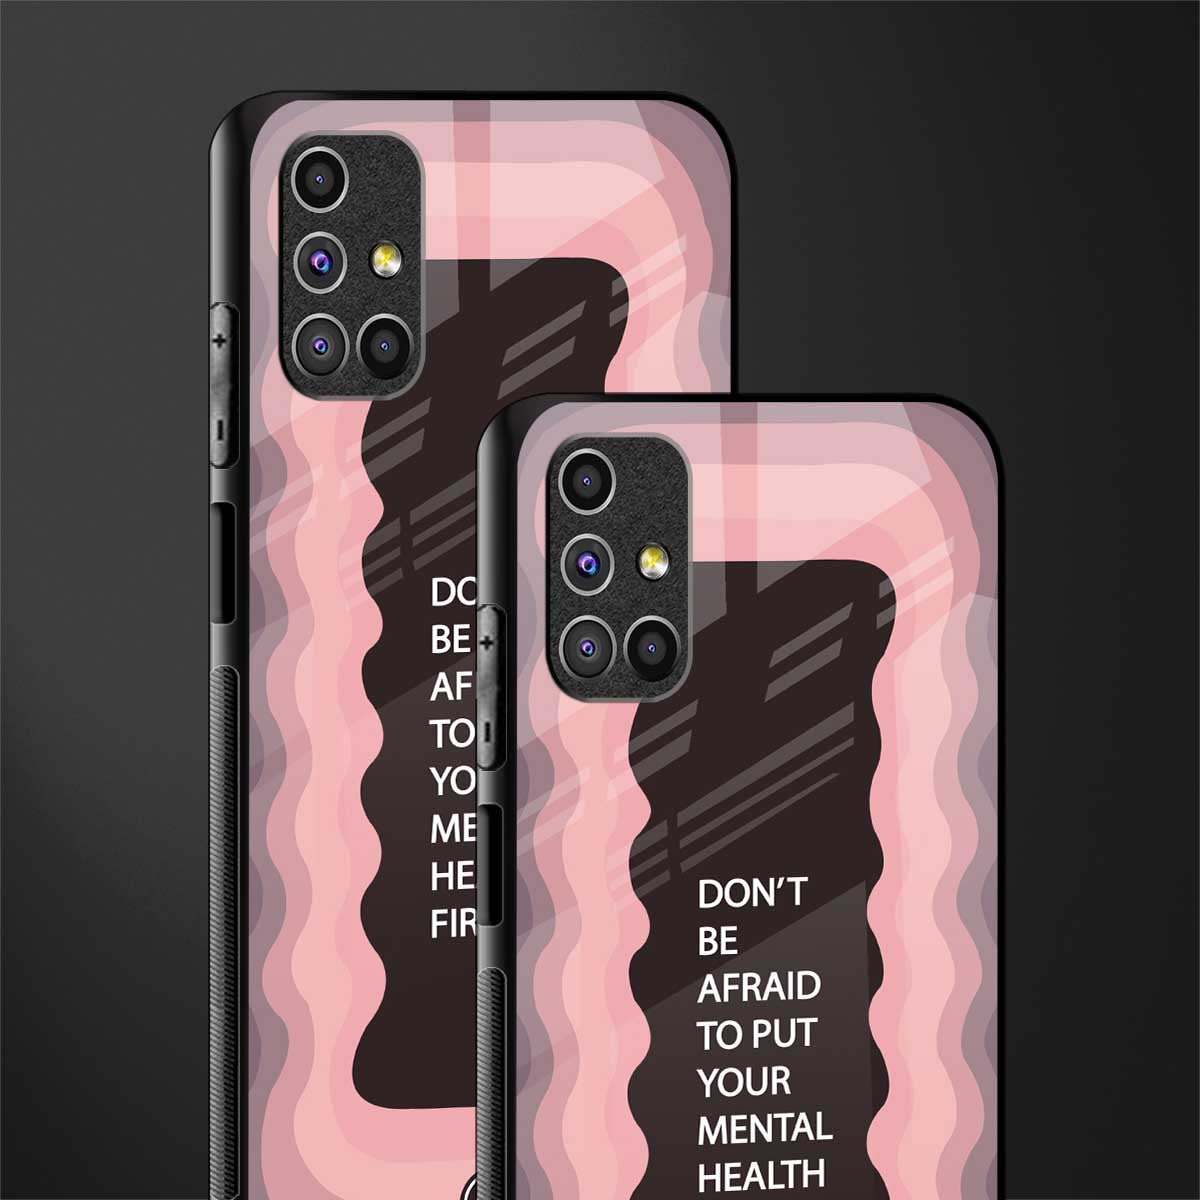 mental health first glass case for samsung galaxy m31s